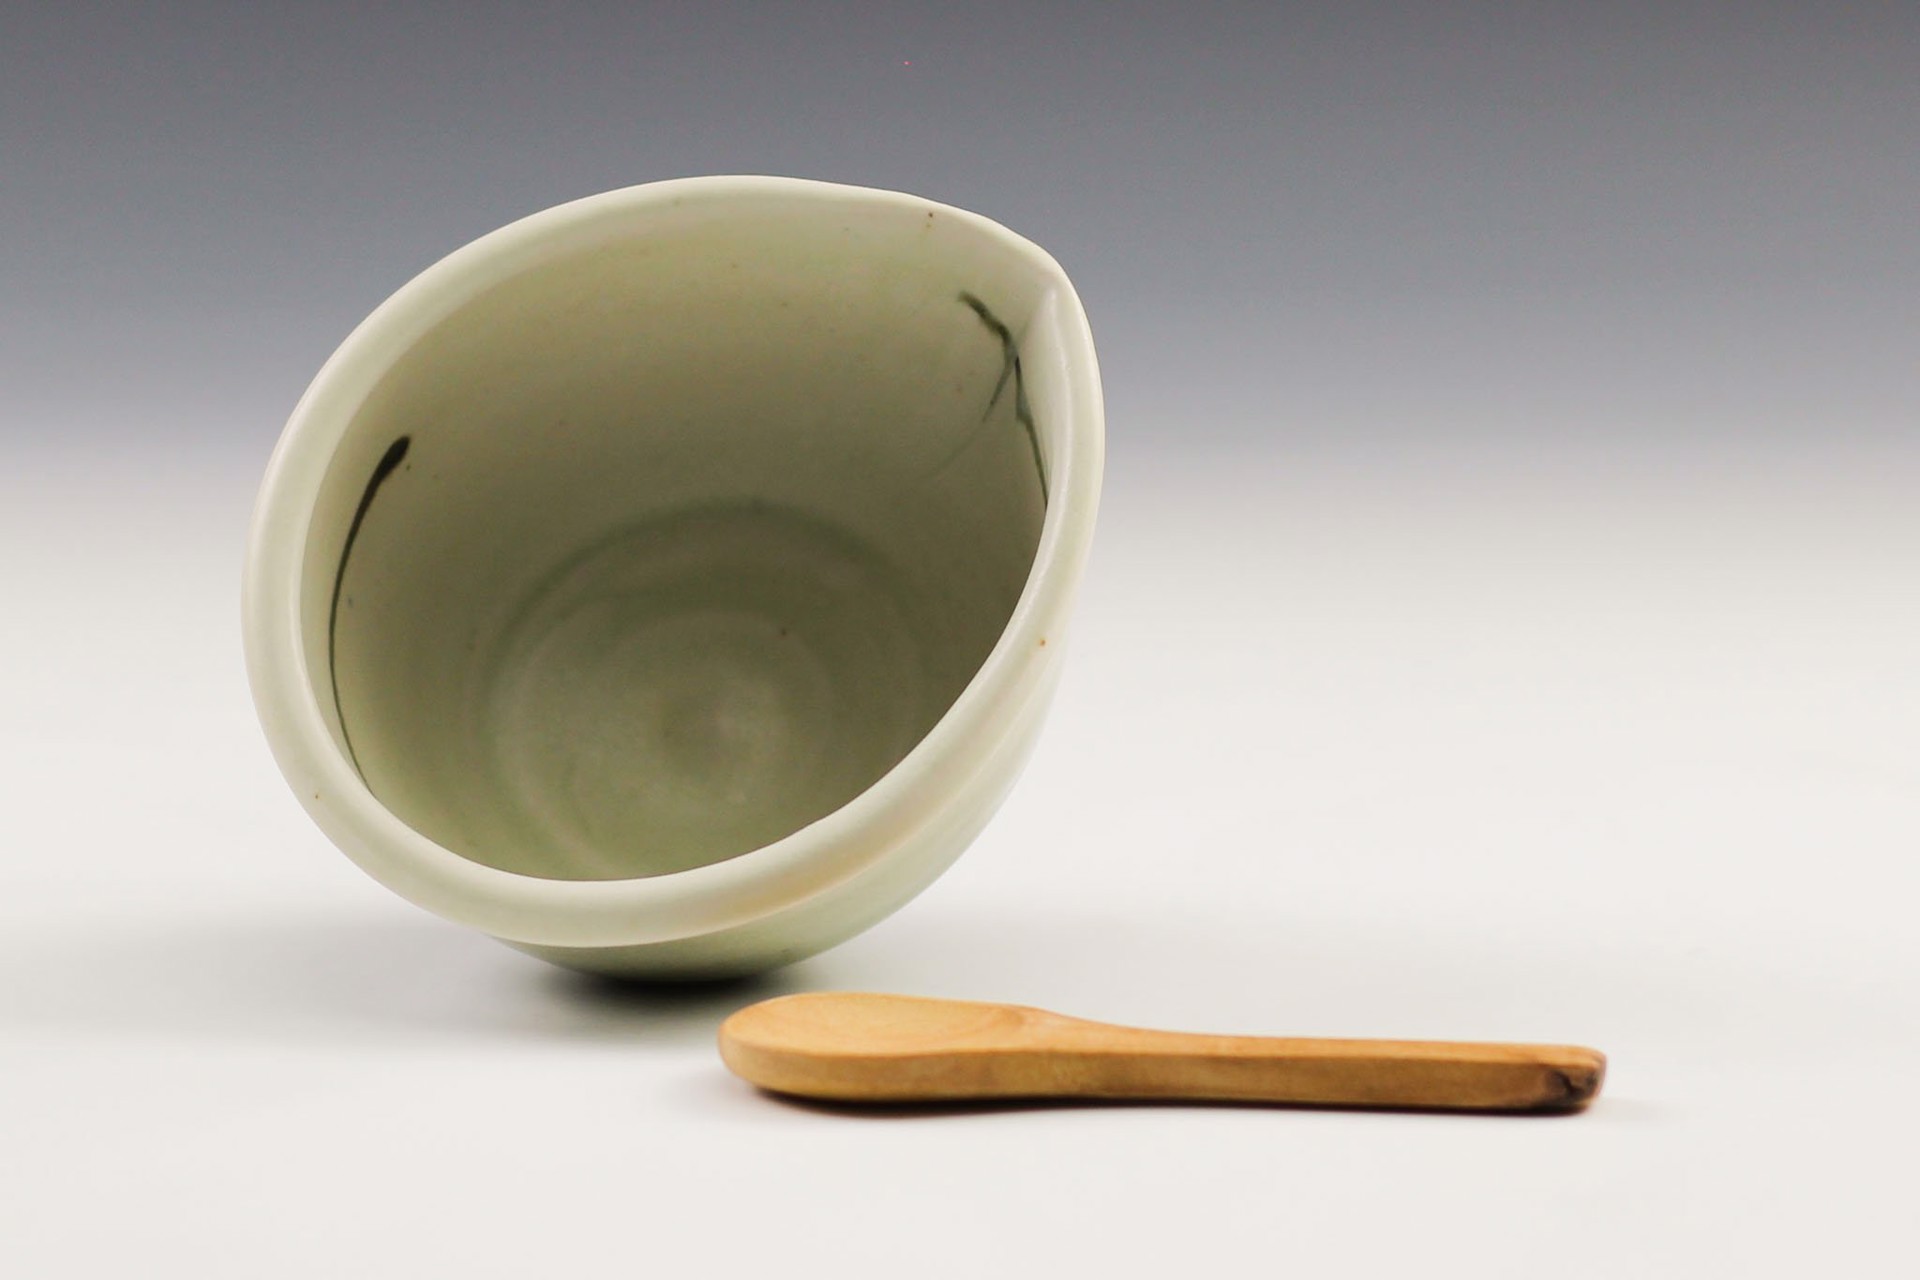 Condiment Bowl with Spoon by Delores Fortuna